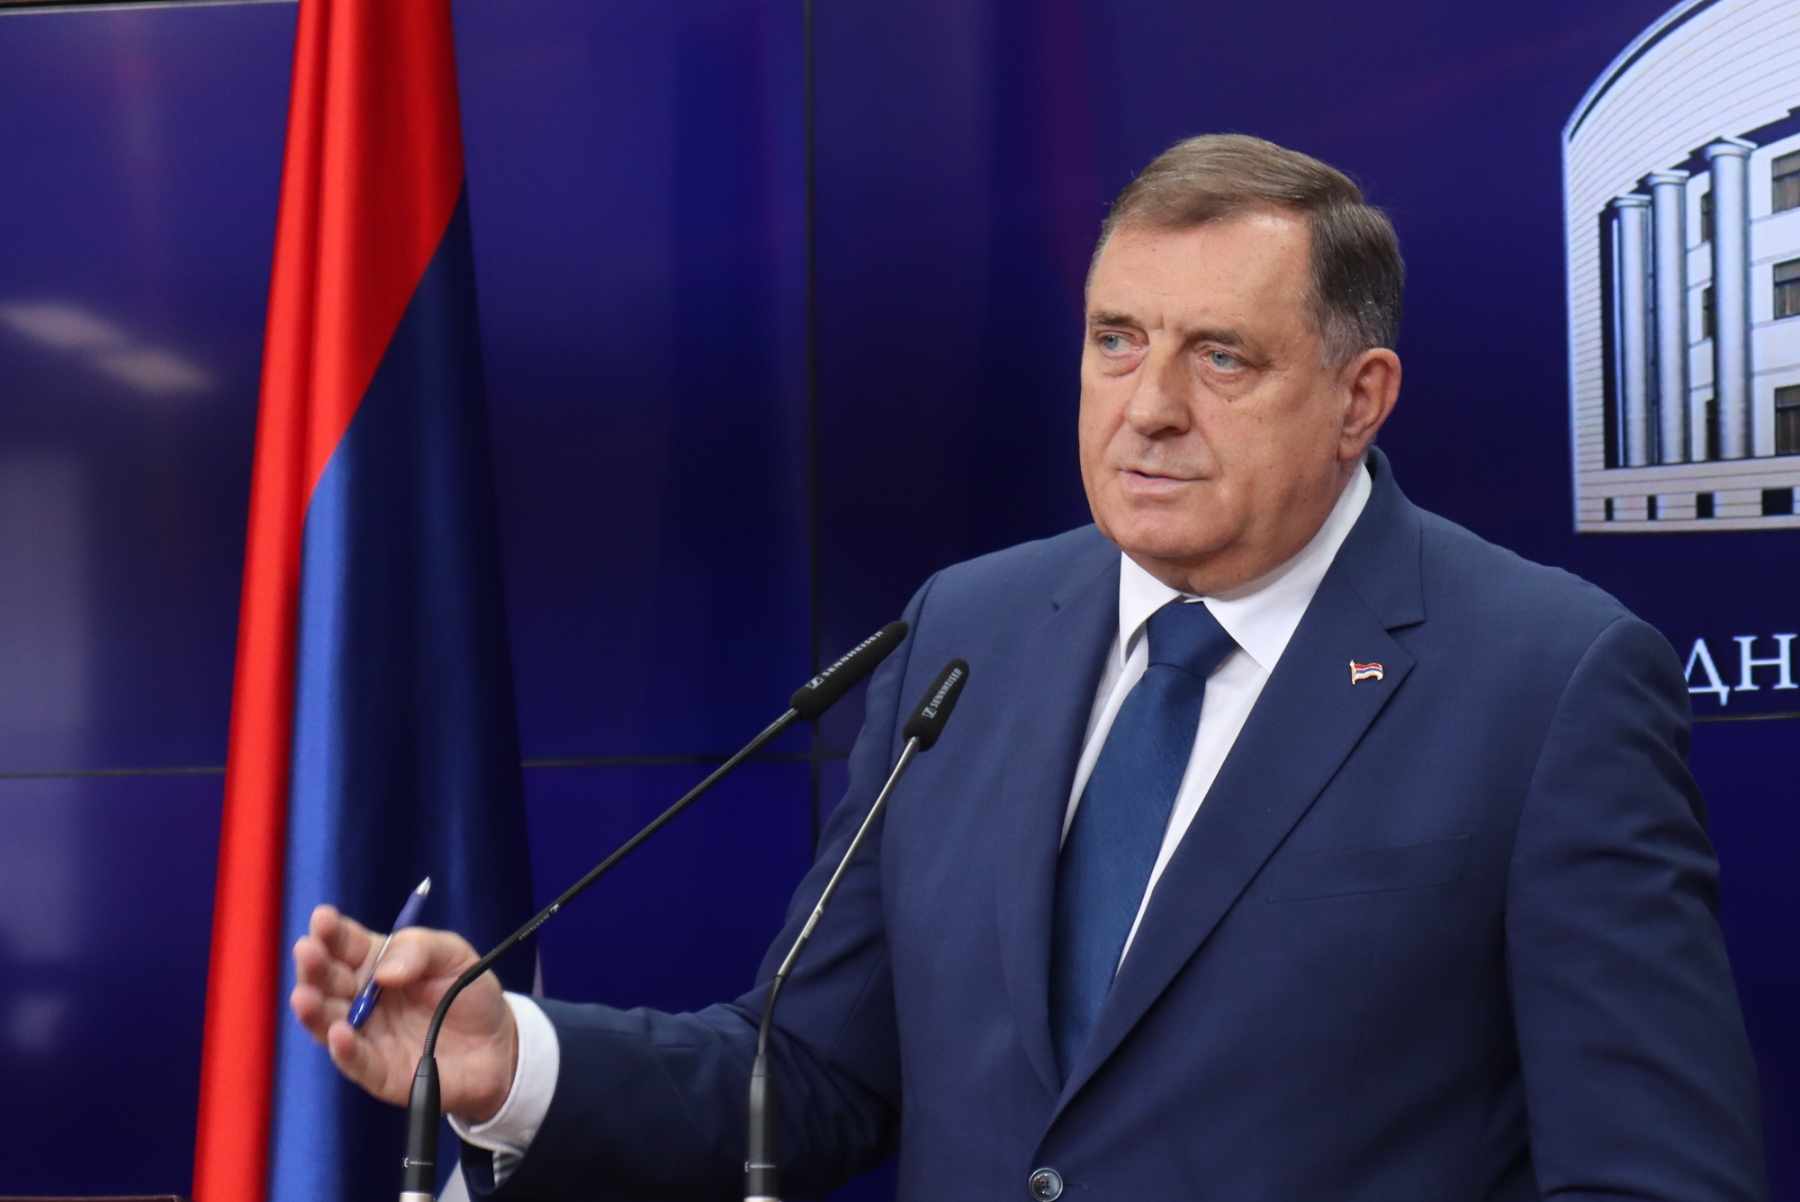 Dodik Says He Will Be The First President Of An Independent Republika Srpska